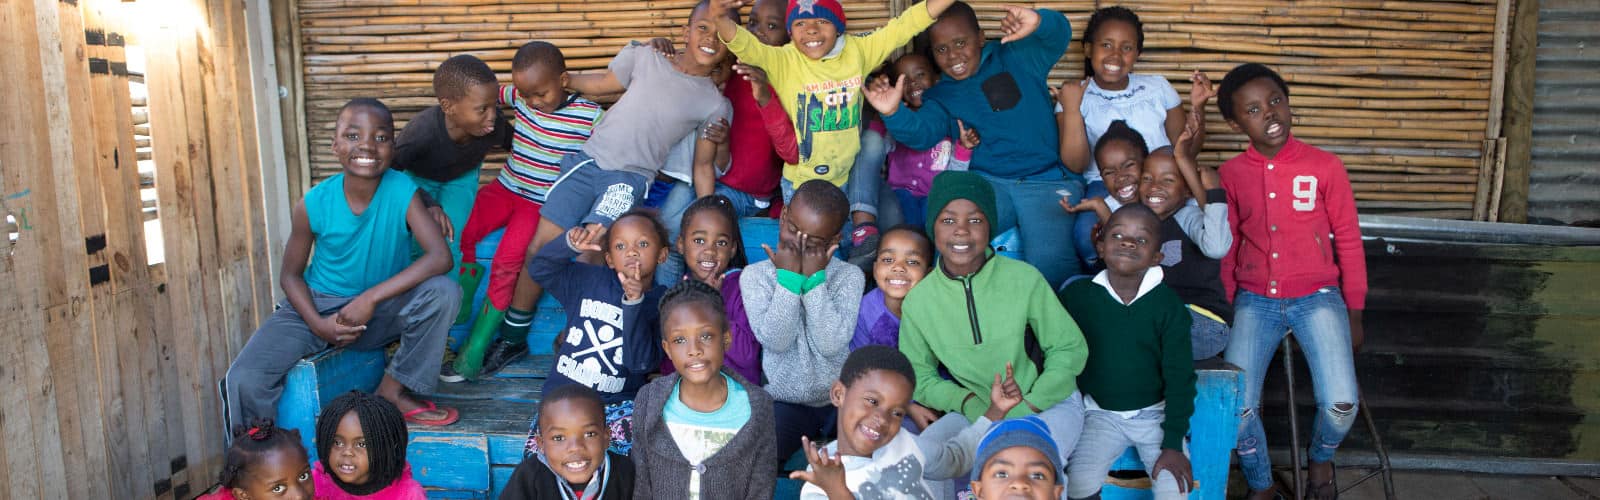 What to expect from social work internships in South Africa